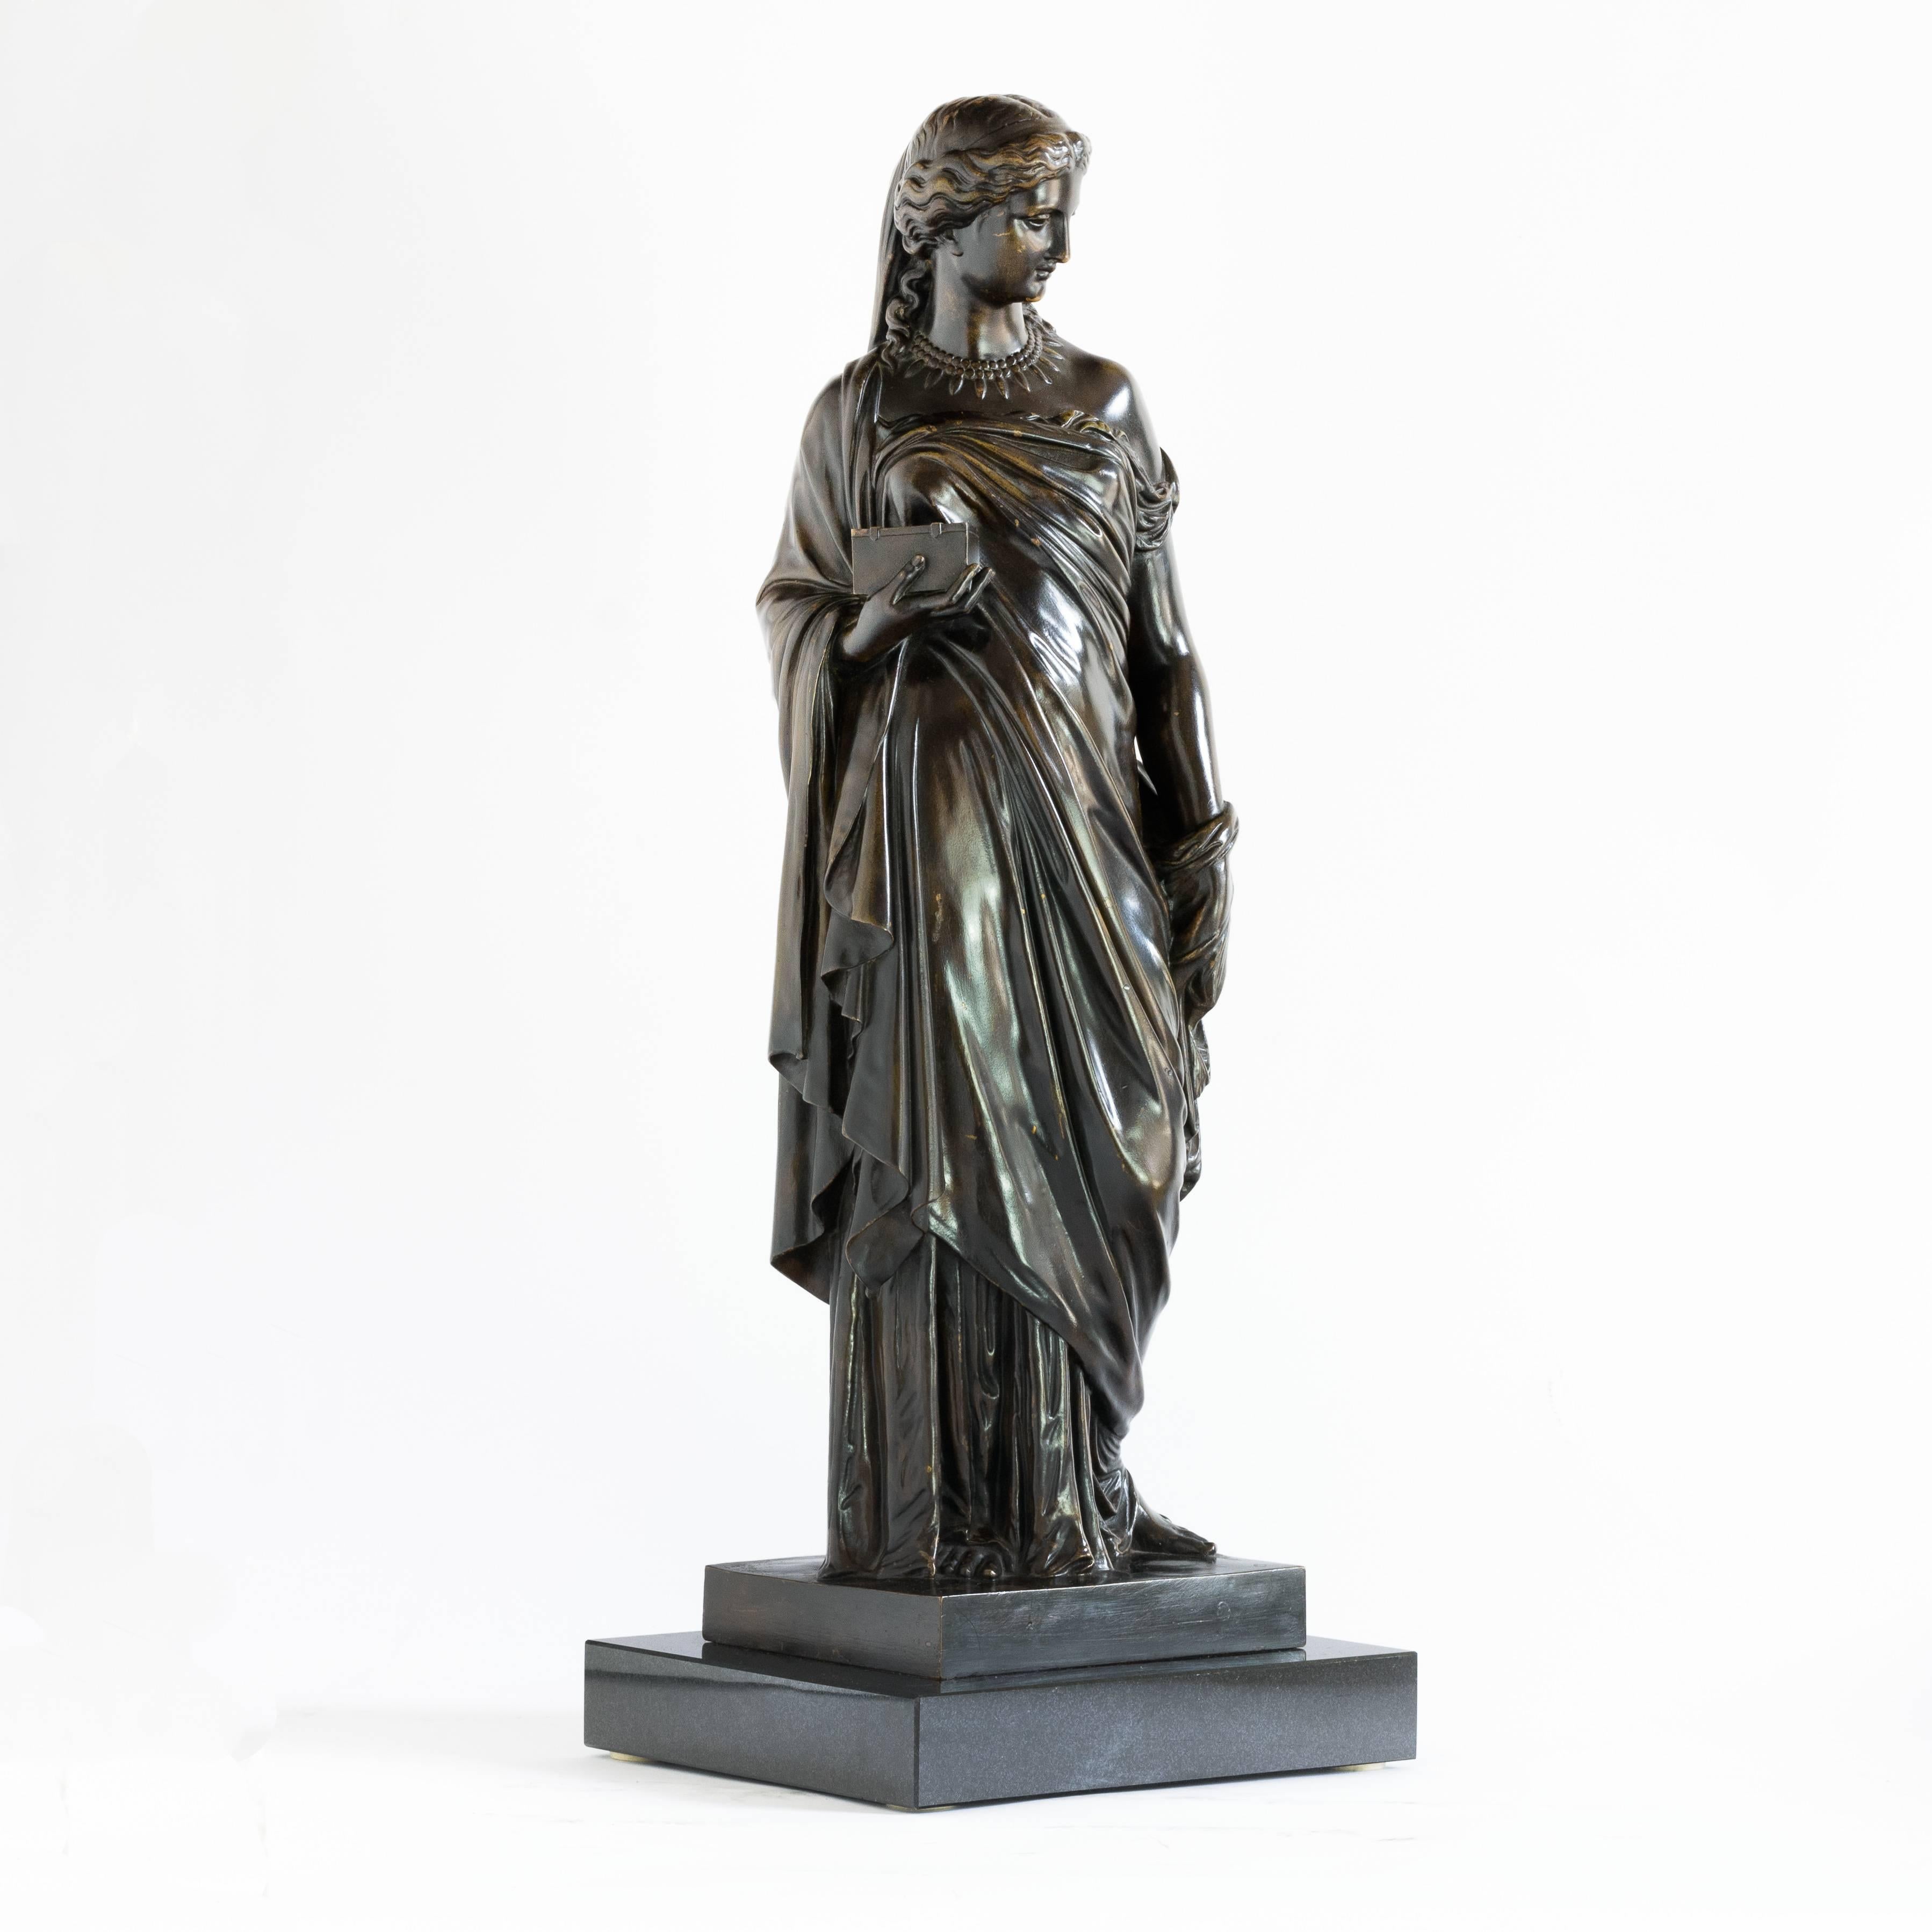 French mid-19th century bronze of Pandora, by Eugene Aizelin, circa 1865 and cast by the Barbedienne foundry, set on plinth base.